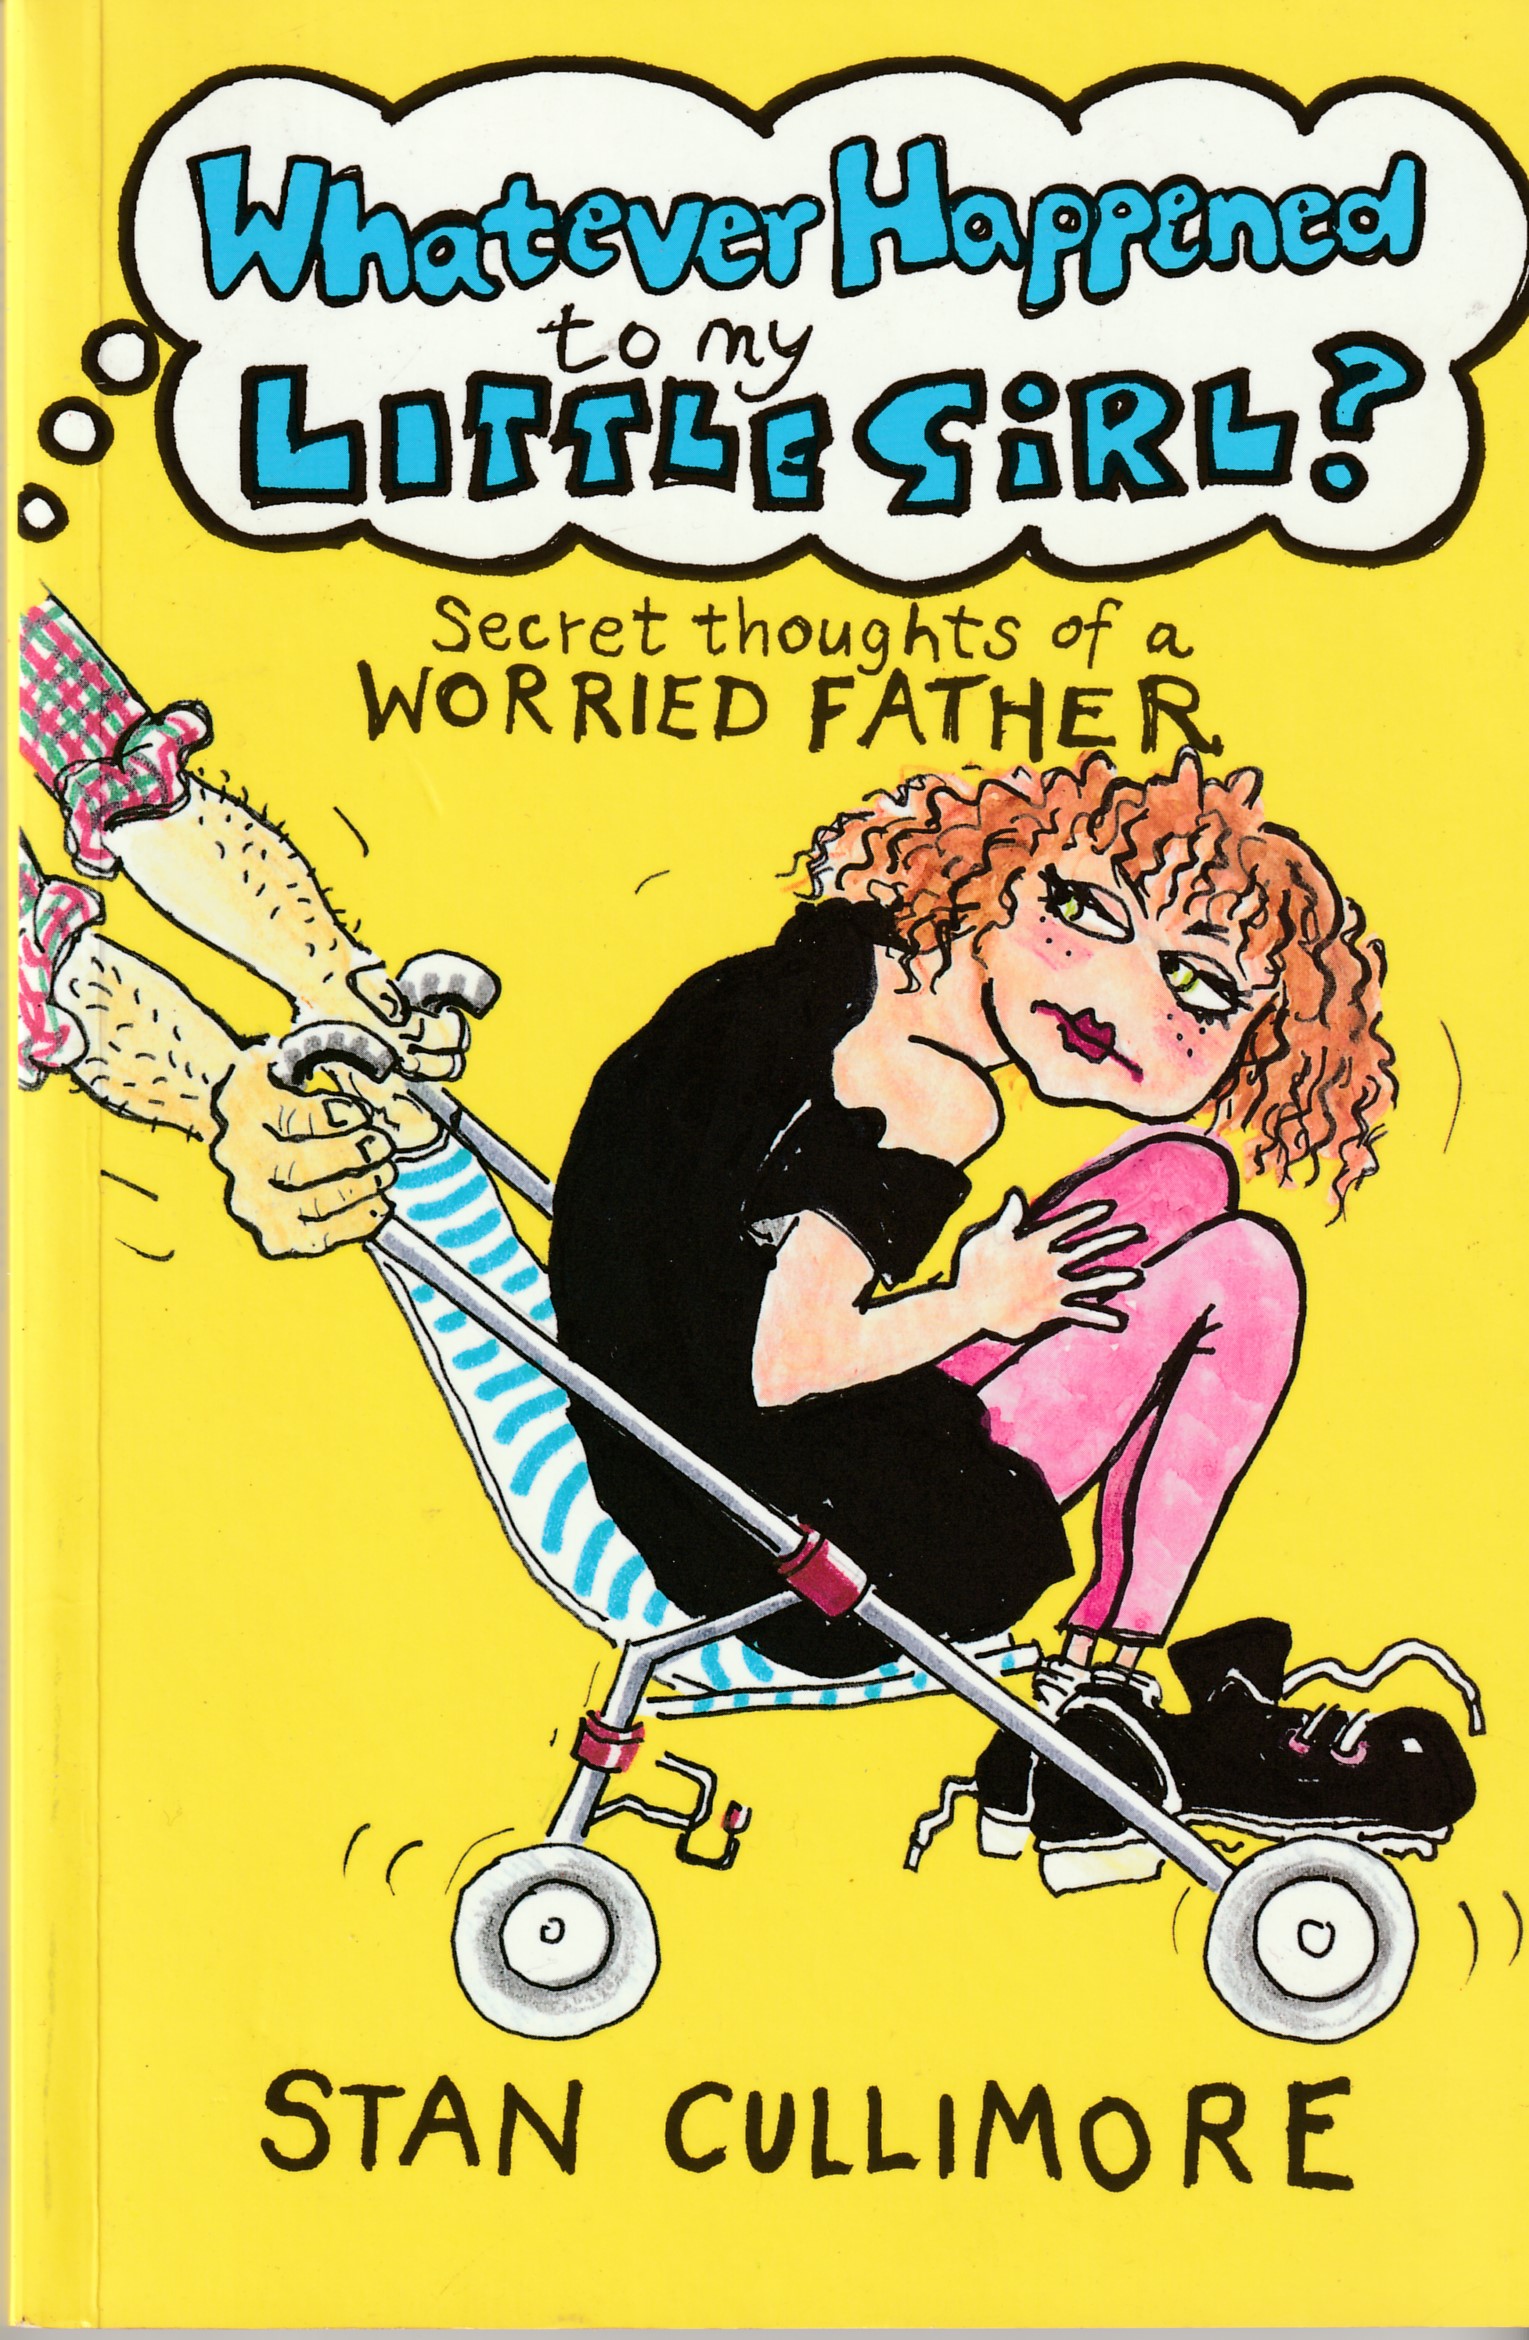 CULLIMORE, STAN - Whatever Happened to My Little Girl? Secret Thoughts of a Worried Father